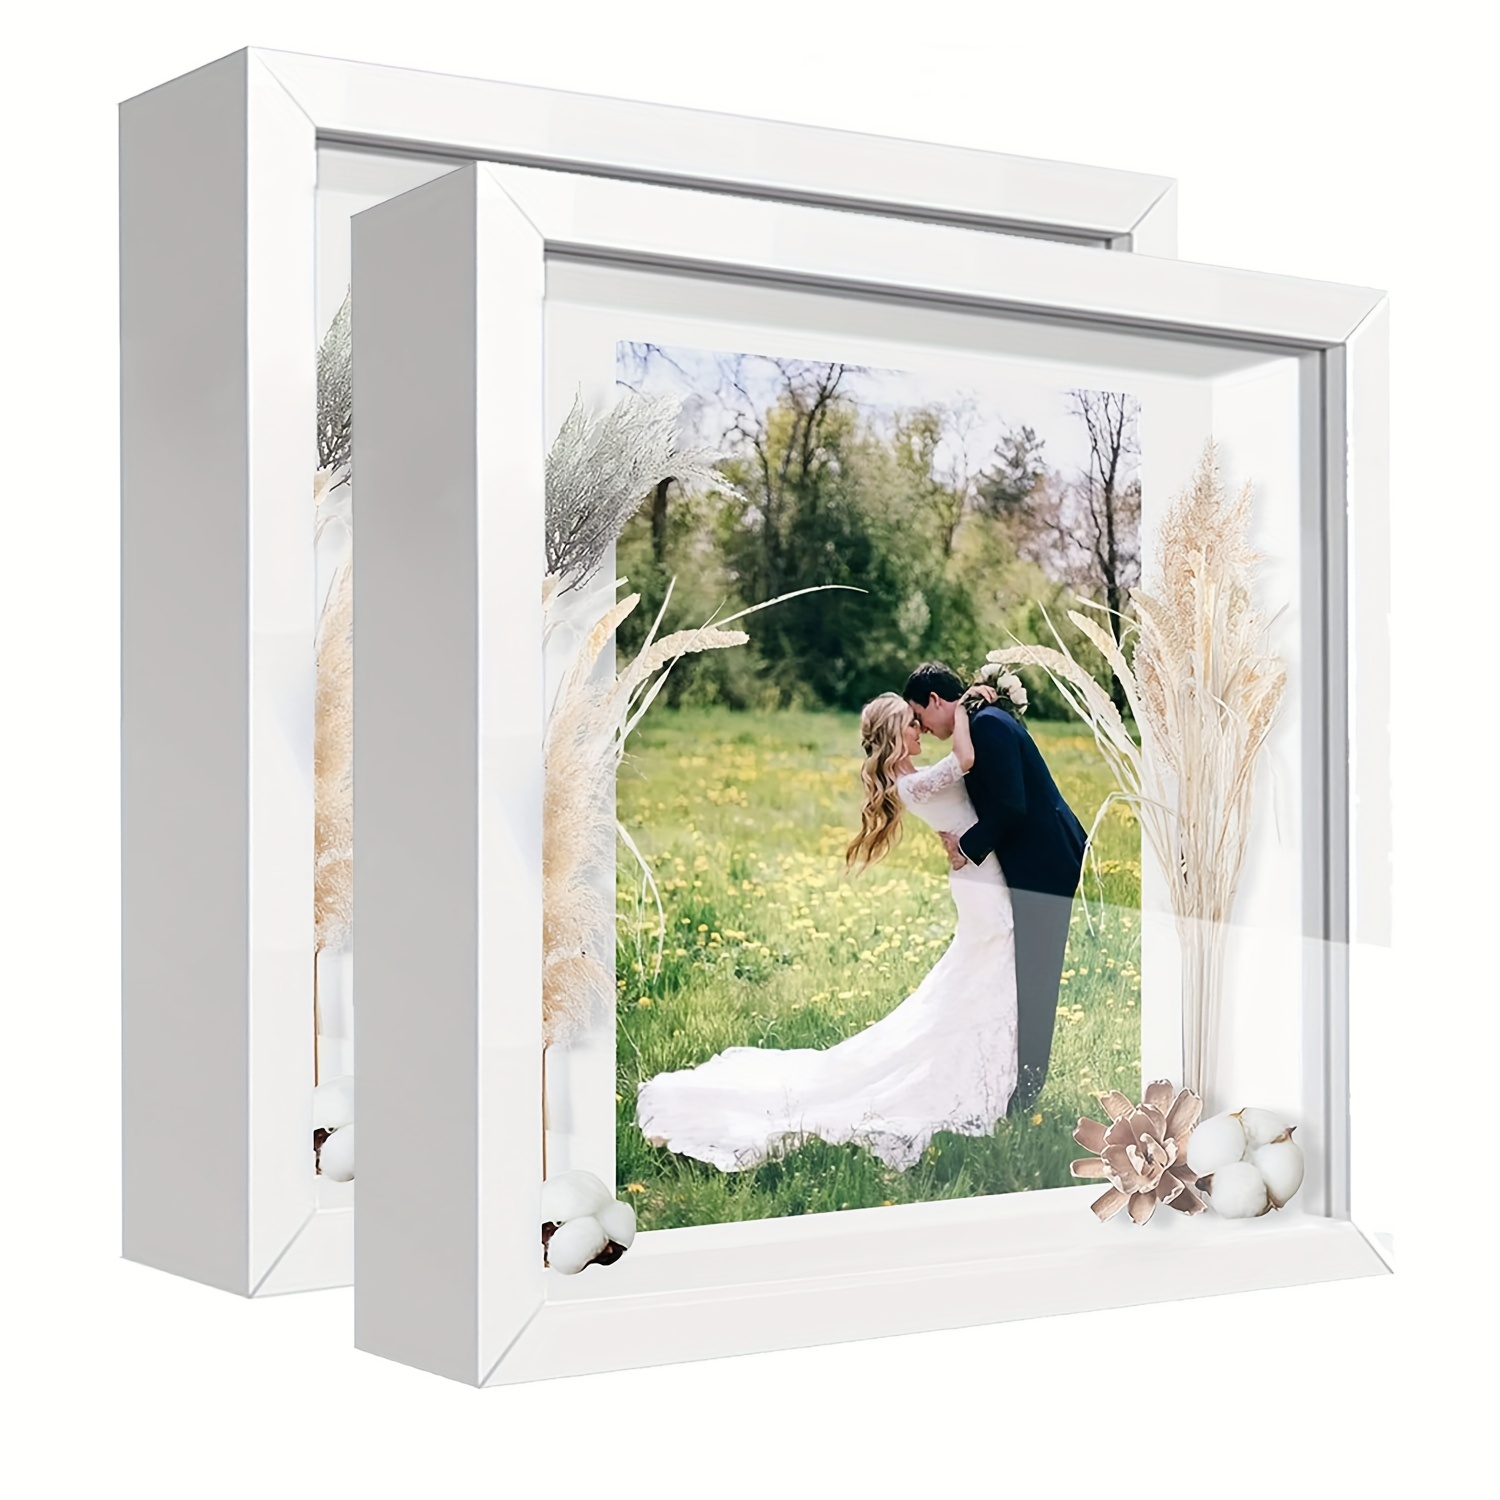 Anhow 2pcs 8x8 Shadow Box Frame Display Case, 3D Picture Frame with  Transparent Glass, Display Case Box for Photos, Memorabilia, Crafts,  Souvenir